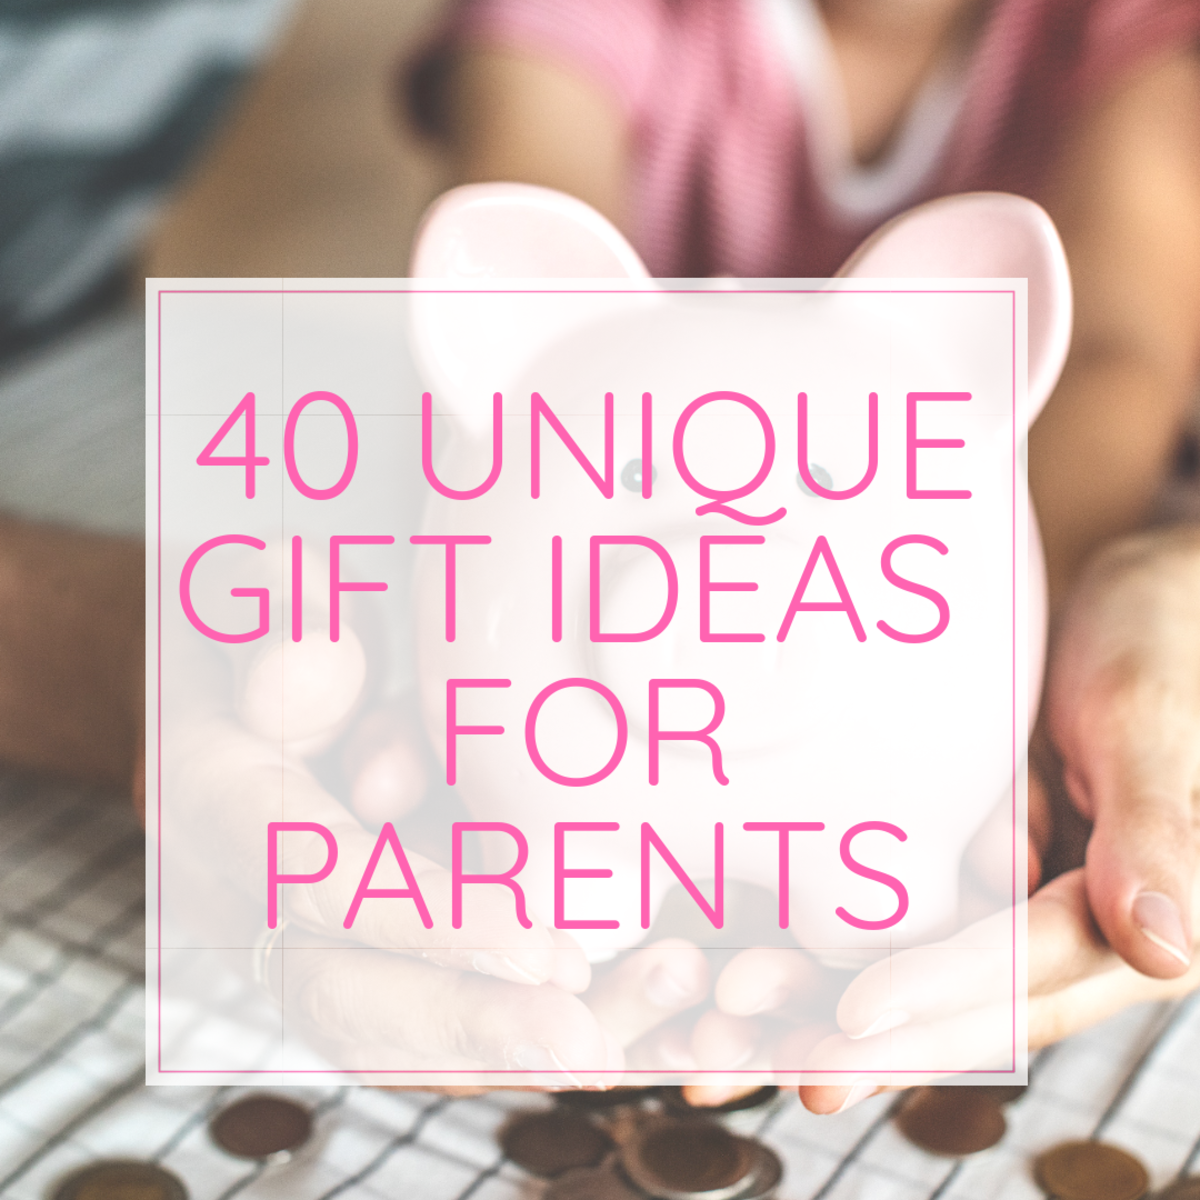 gift ideas for parents